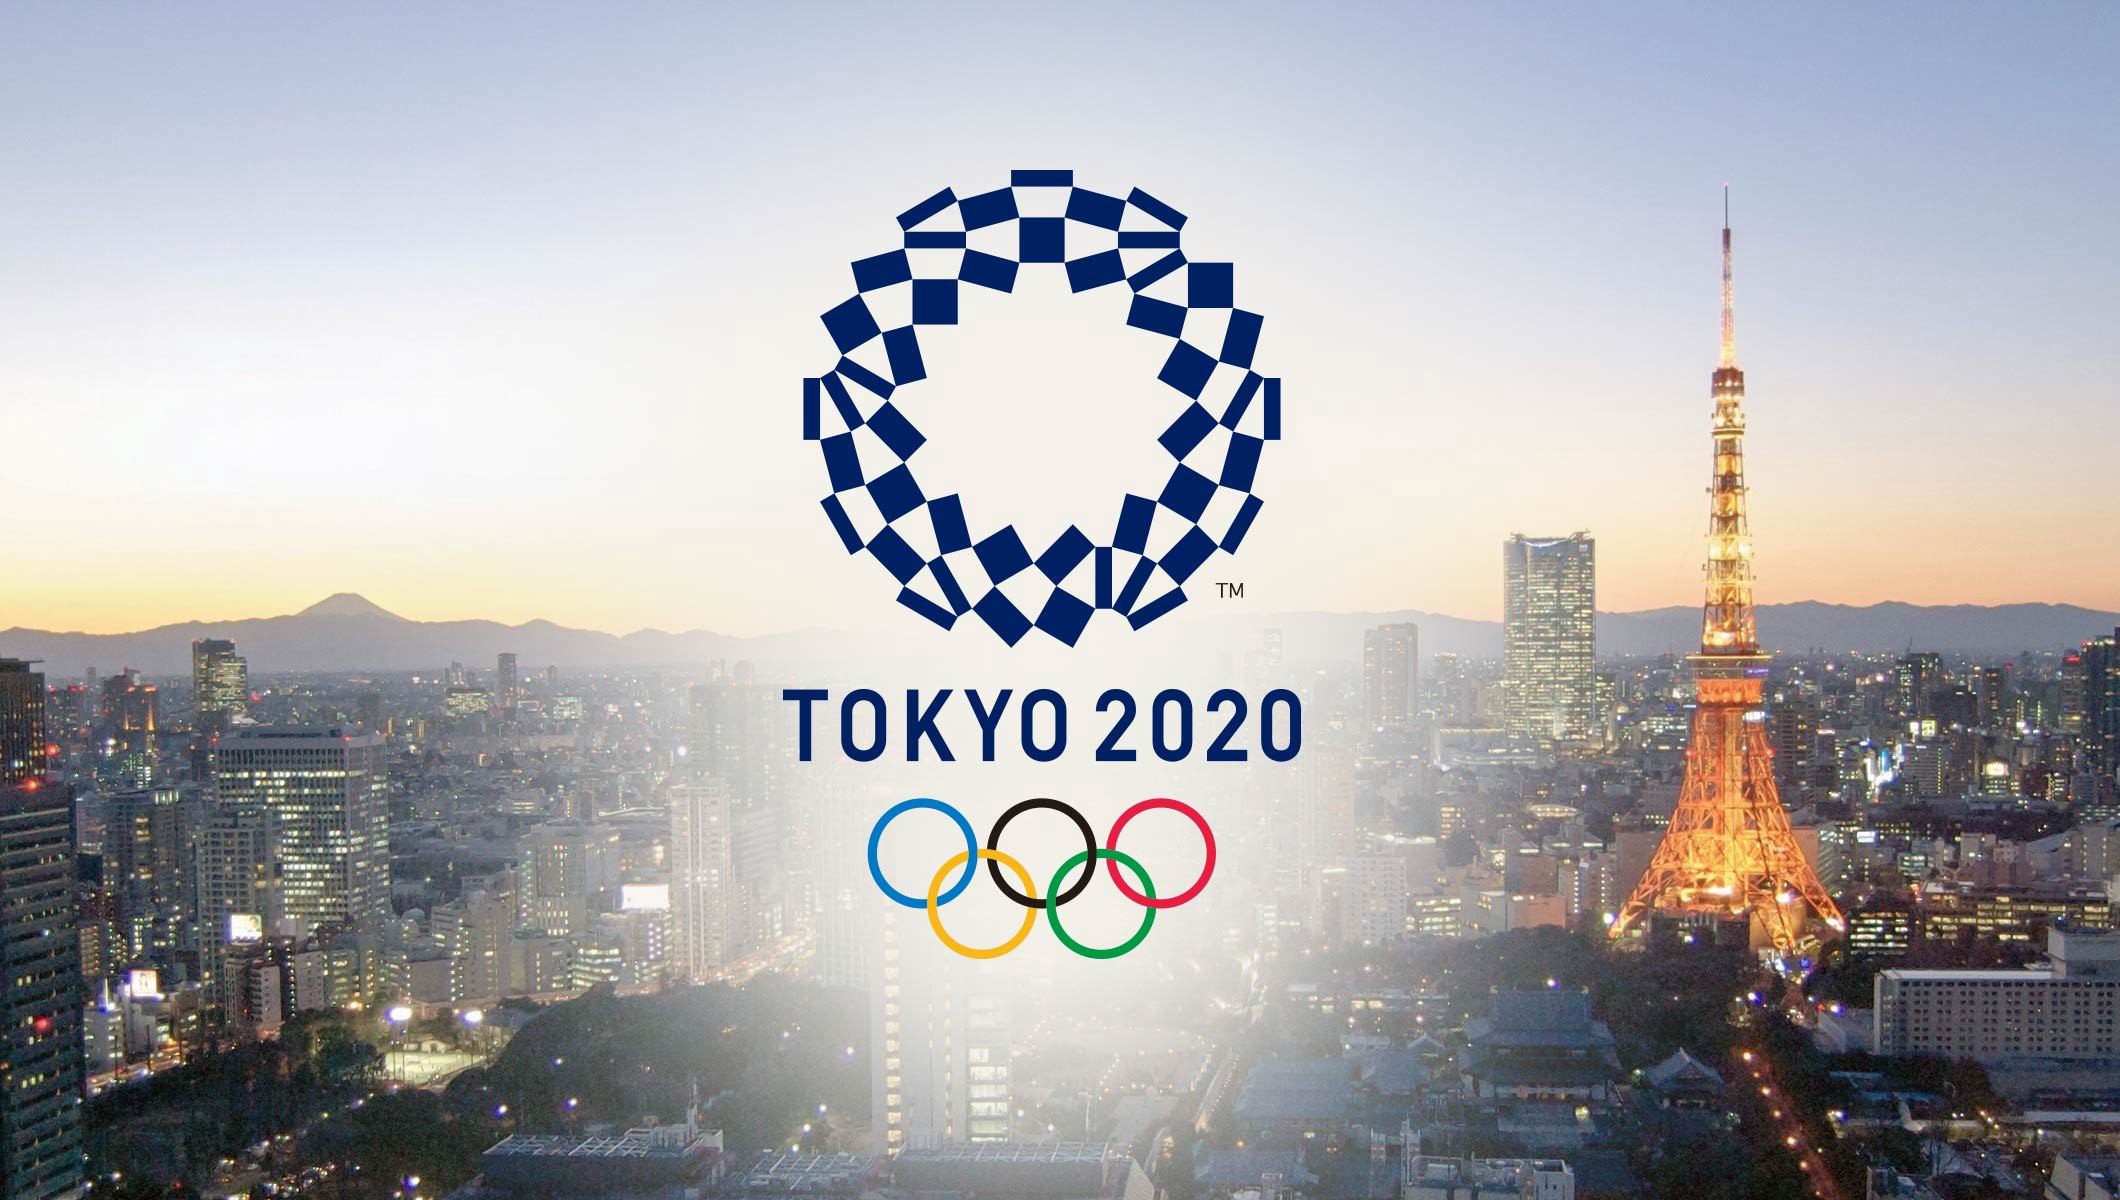 Indonesia offers to assist Tokyo Olympic preparation - Indonesia Olympic Commitee